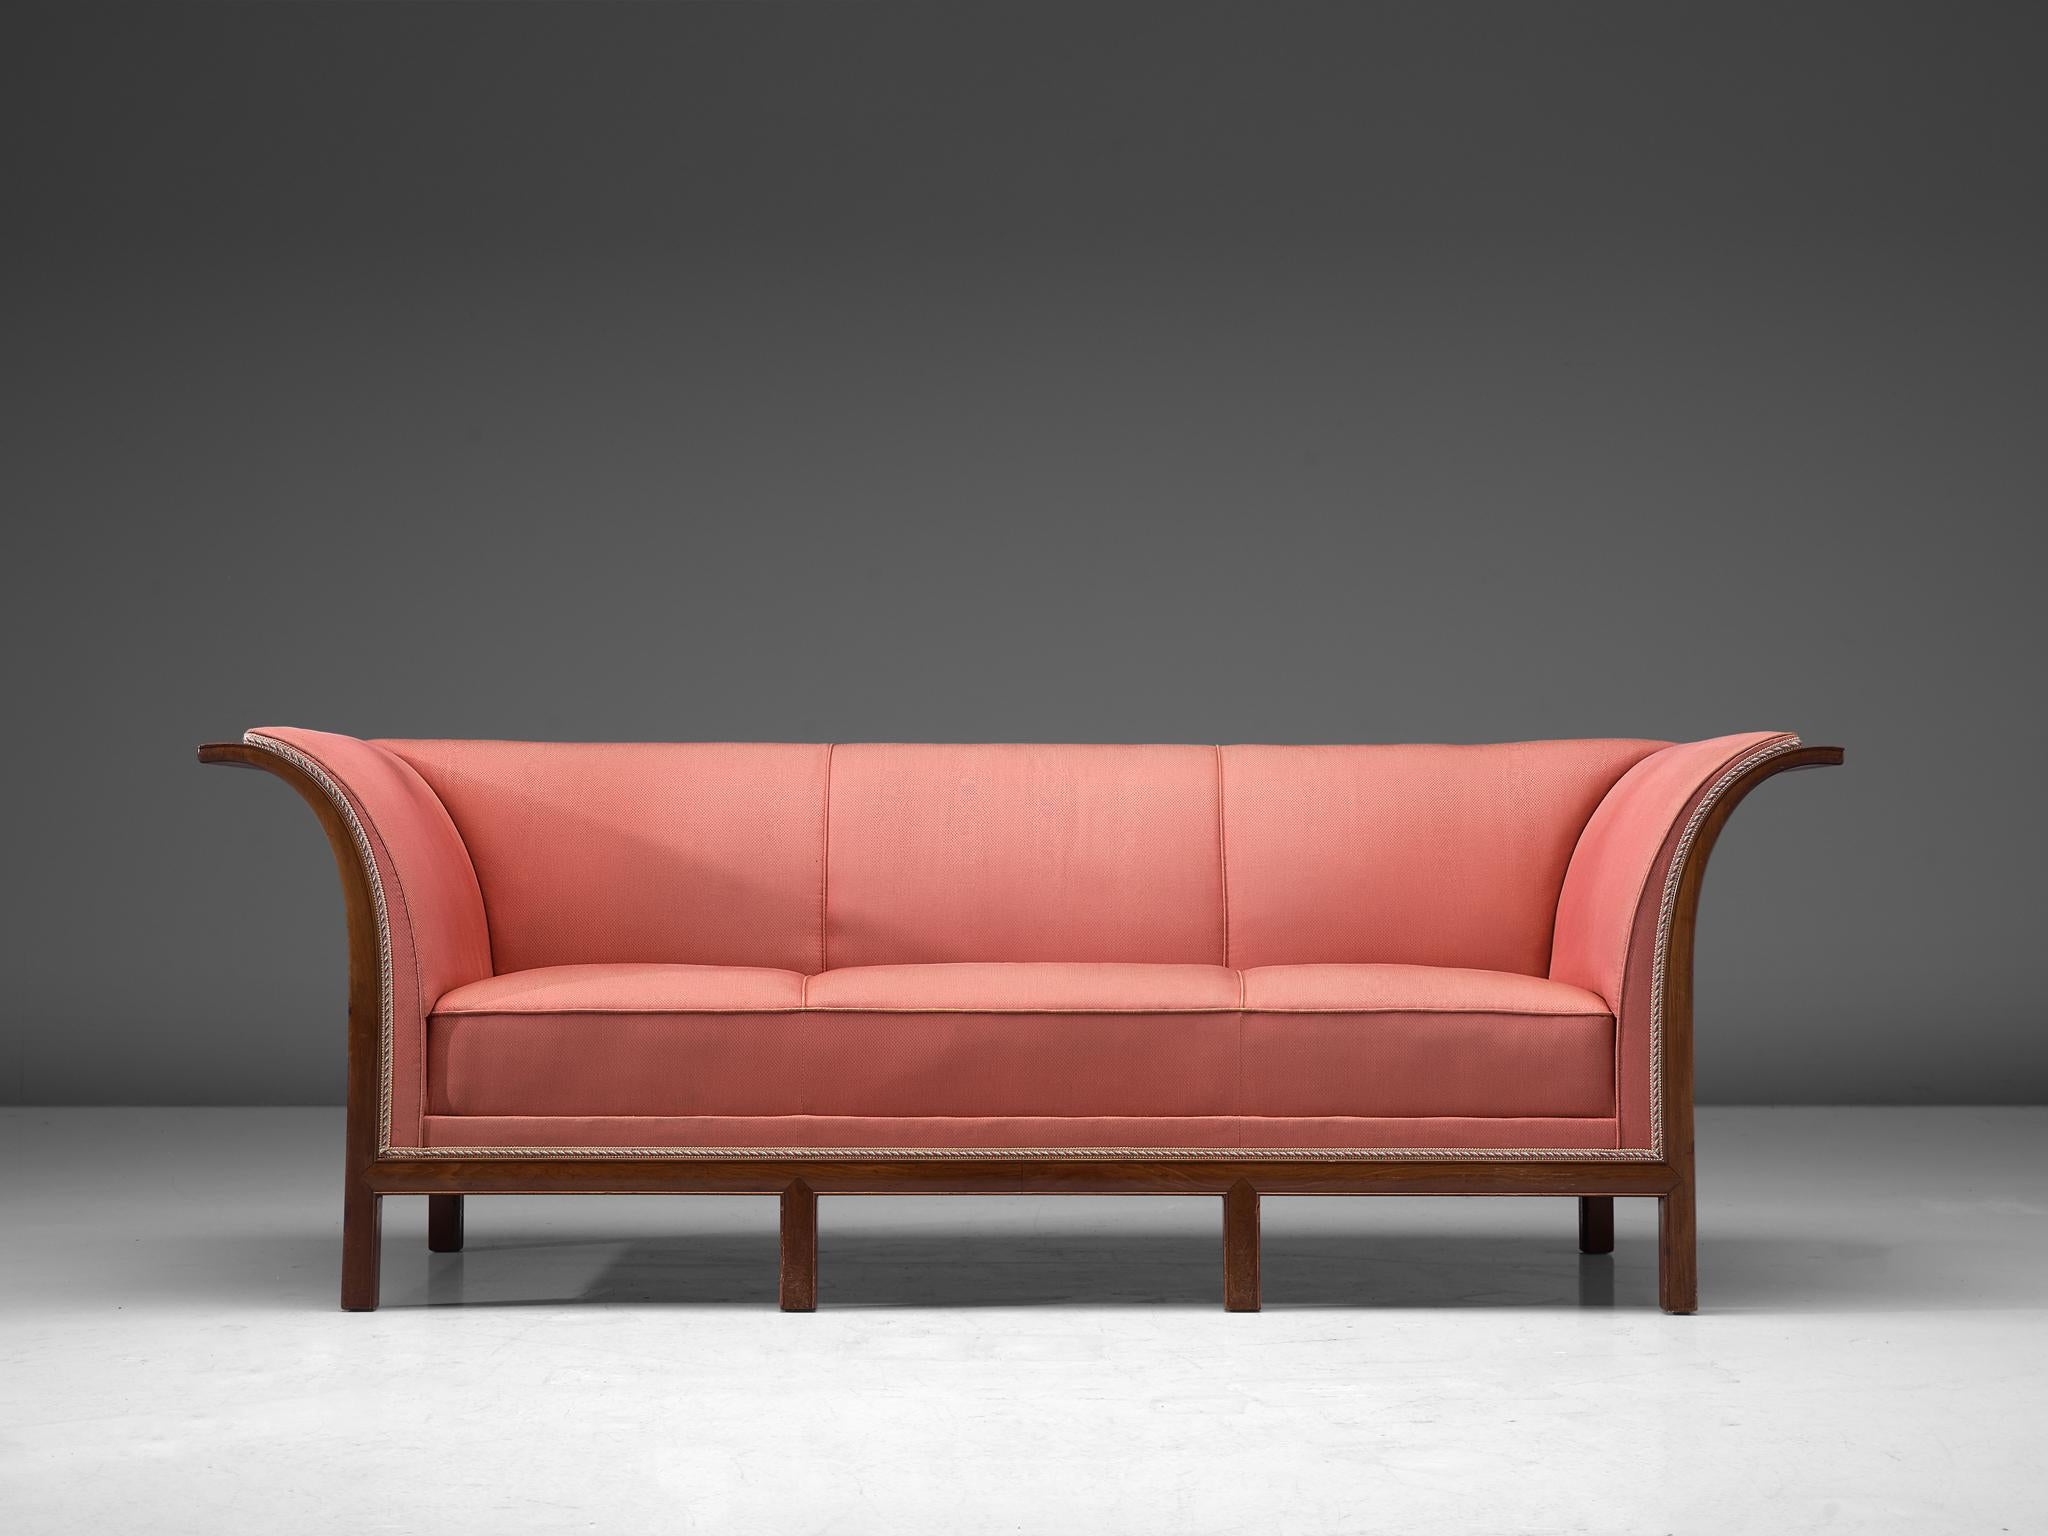 Mid-20th Century Frits Henningsen Sofa in Mahogany and Pink Upholstery For Sale